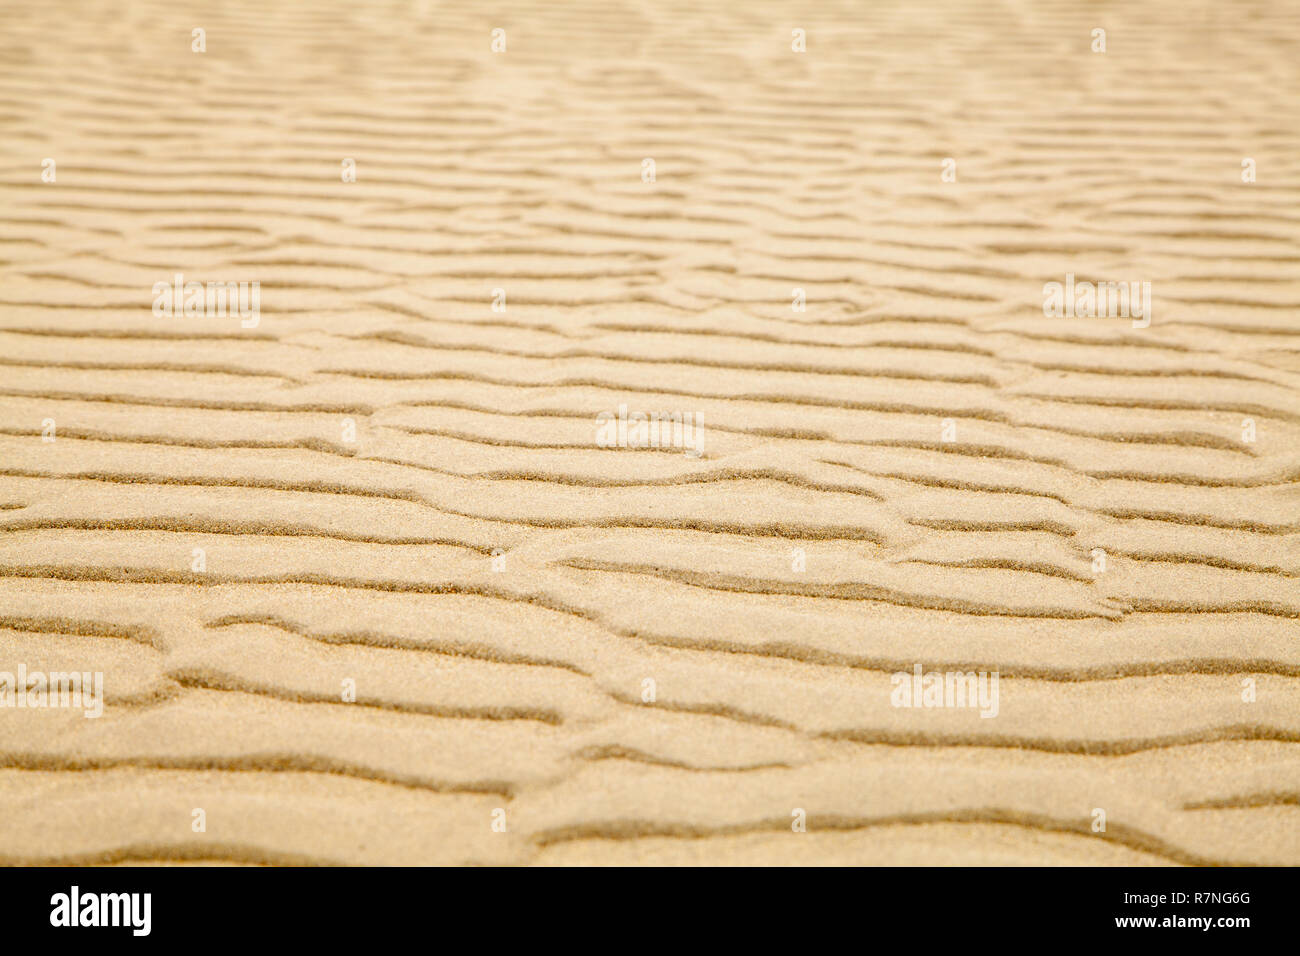 Tan Beach Sand With Ripple Pattern Background. Stock Photo